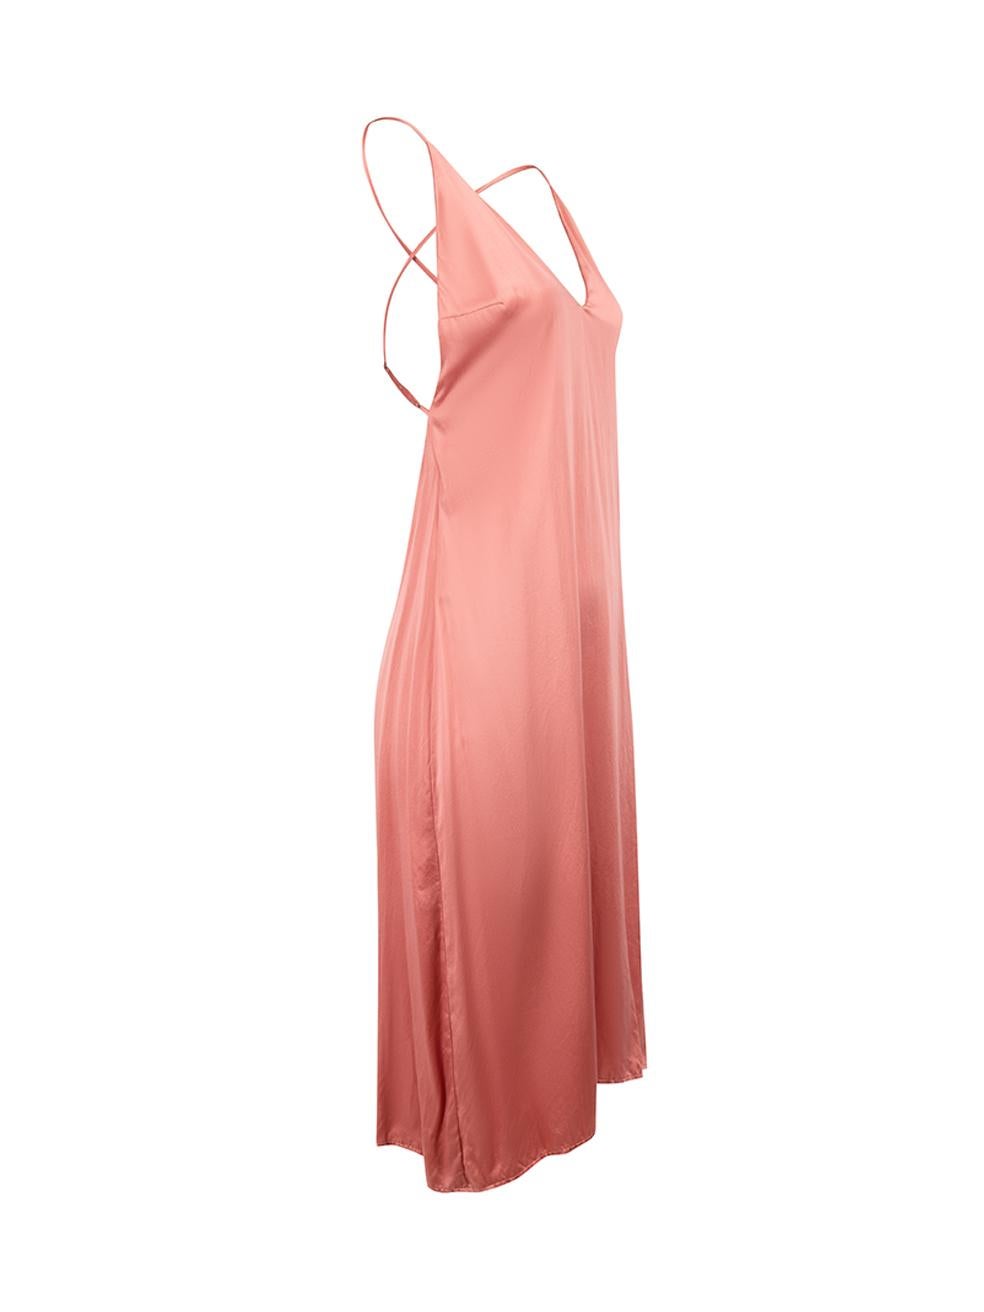 CONDITION is Very good. Minimal wear to dress is evident where black marks on straps can be seen on this used Reformation designer resale item. 



Details


Salmon pink

Silk

Mini slip dress

V neckline

Adjustable cross shoulder straps

Open